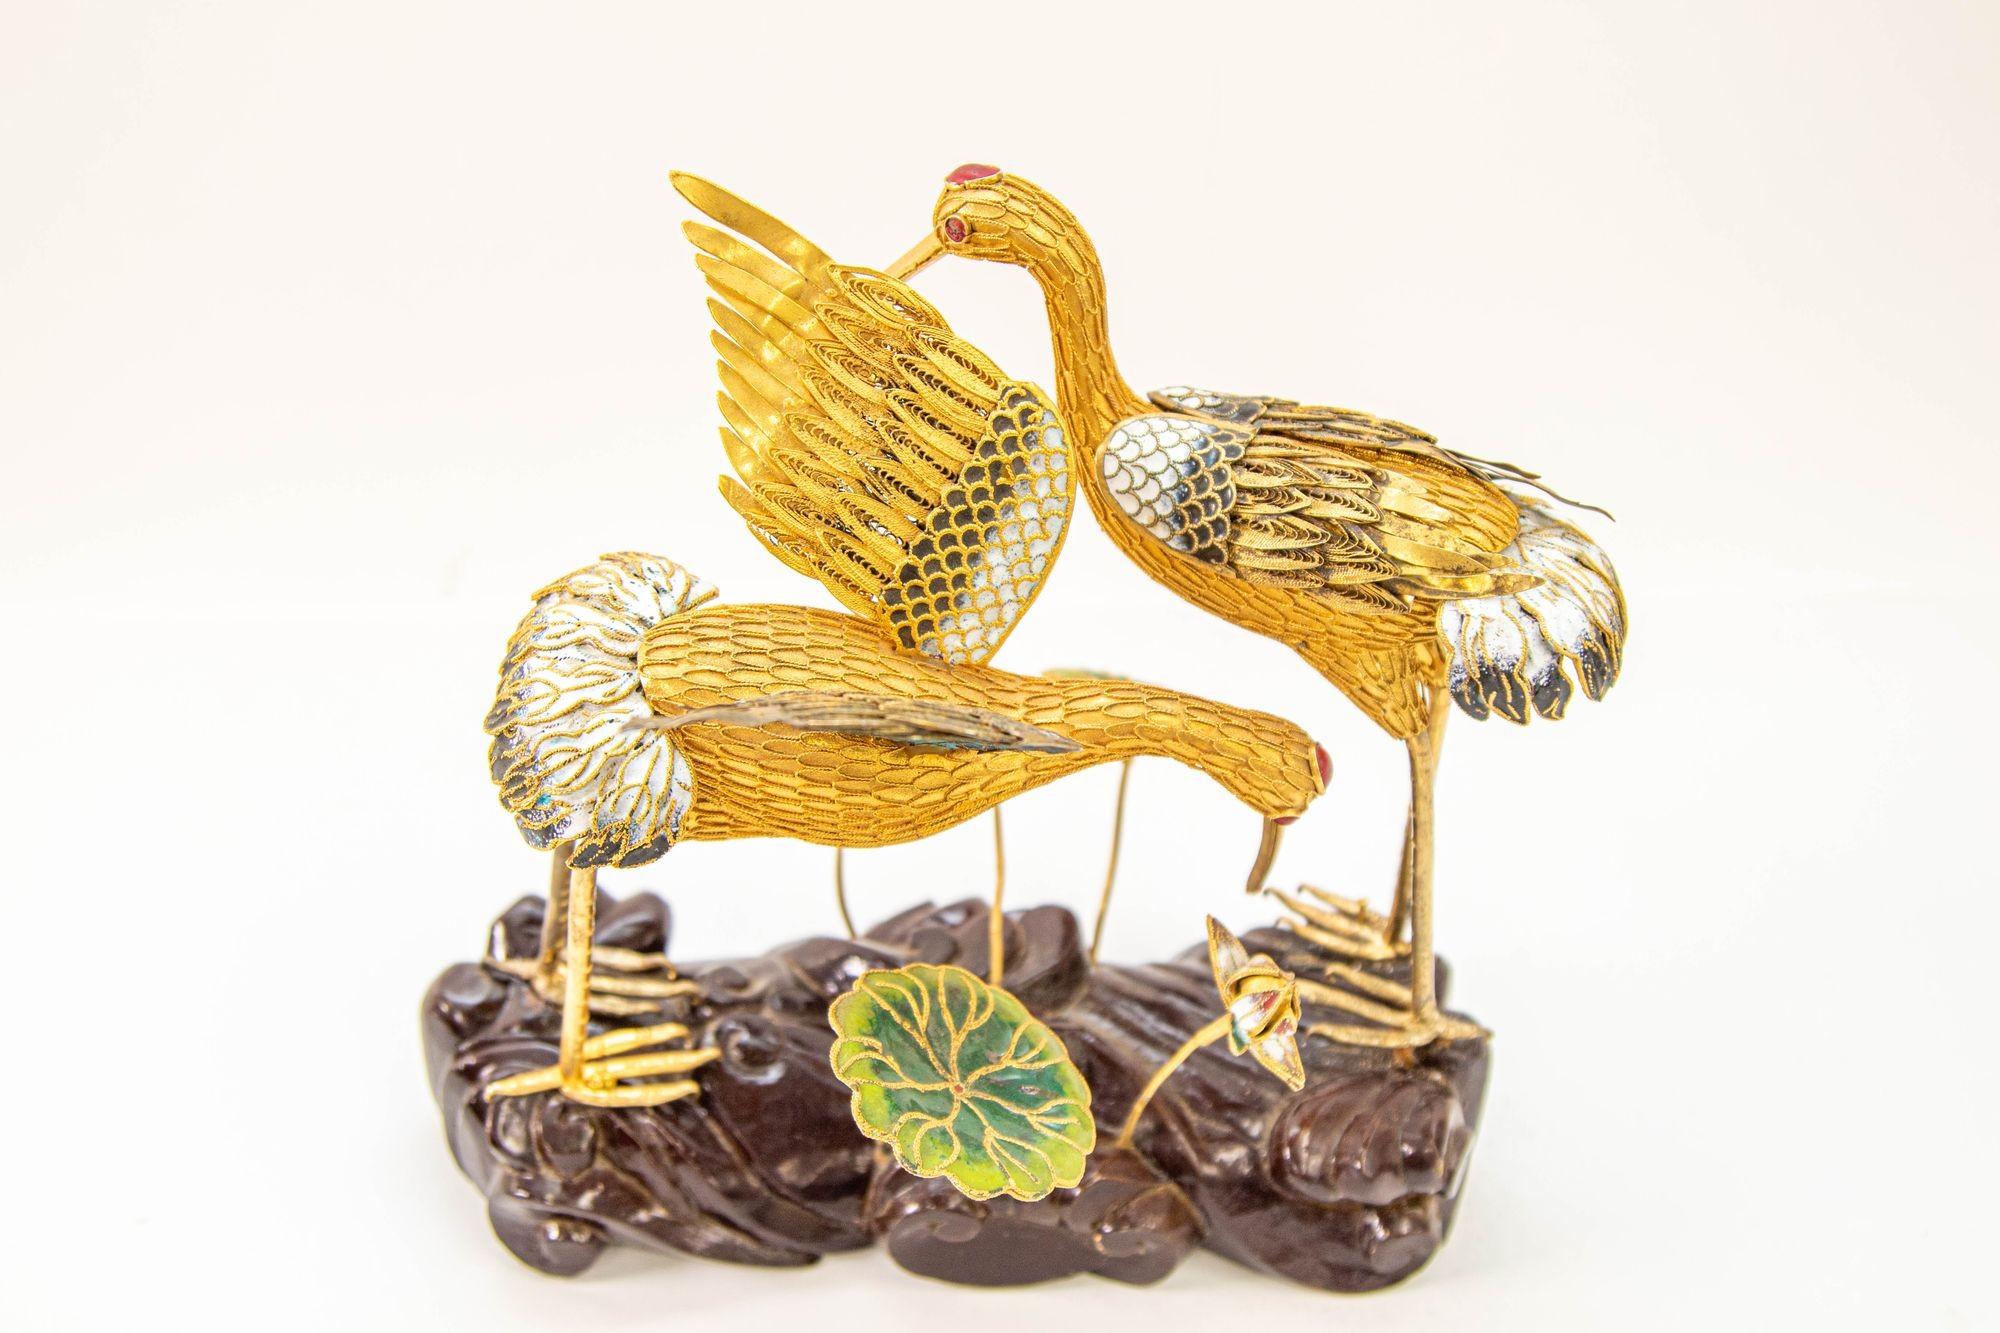 Vintage Chinese Metal Gilt Filigree and Enamel Cranes Figures on Wooden Stand For Sale 7